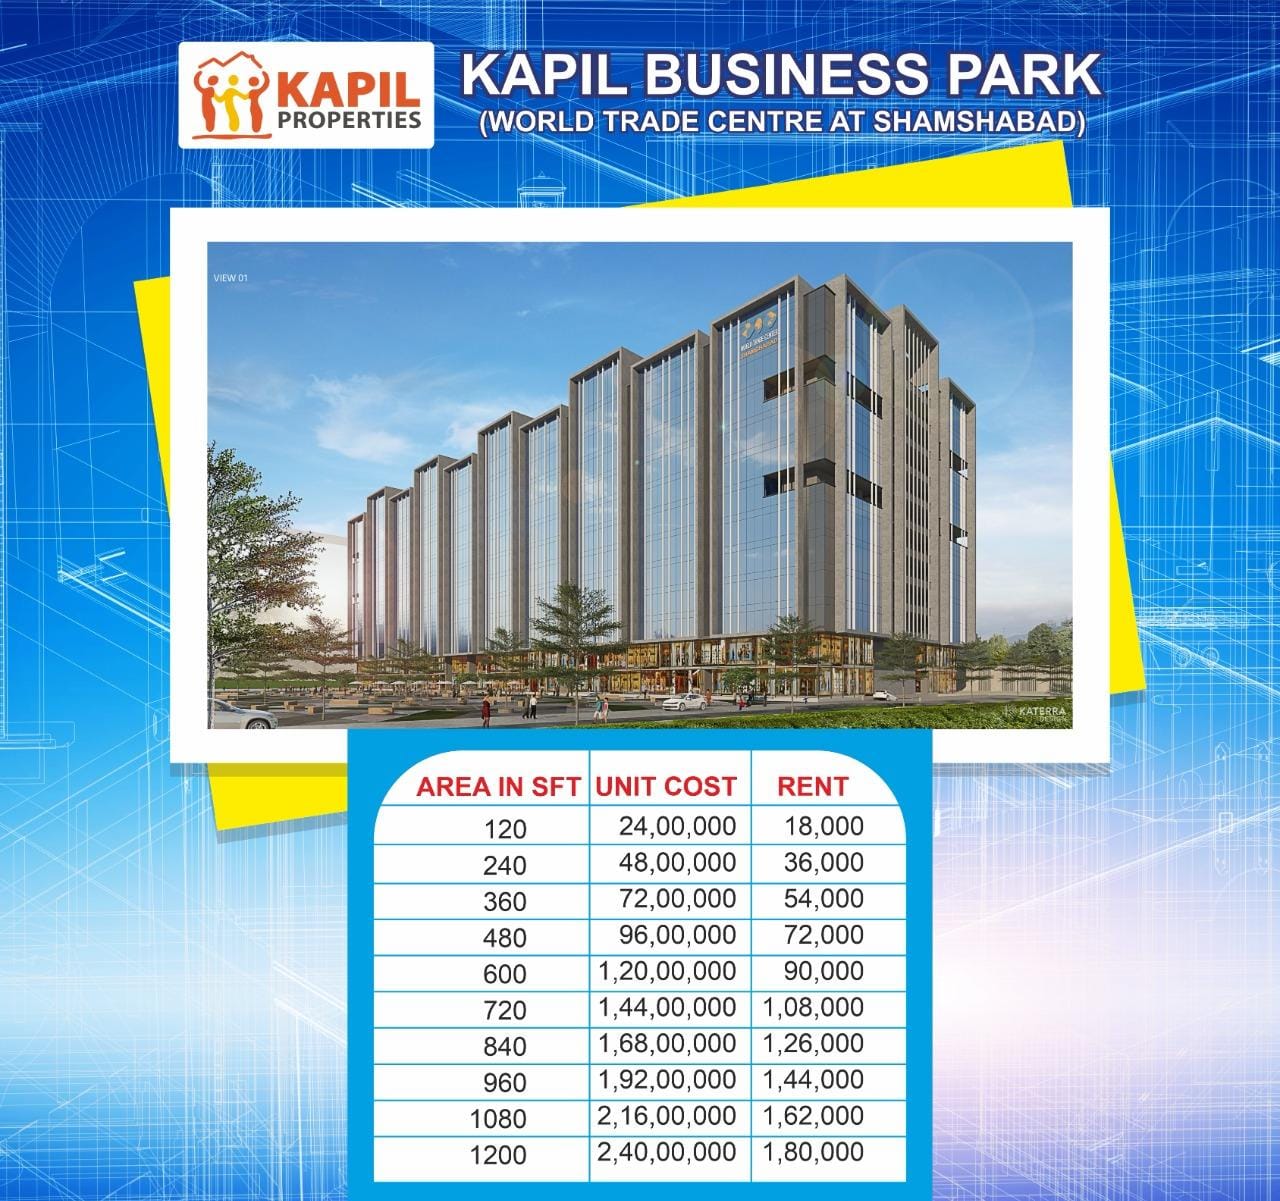 Kapil Business Park 120SFT Invest 2400000 and get monthly 18000 returns from day 1